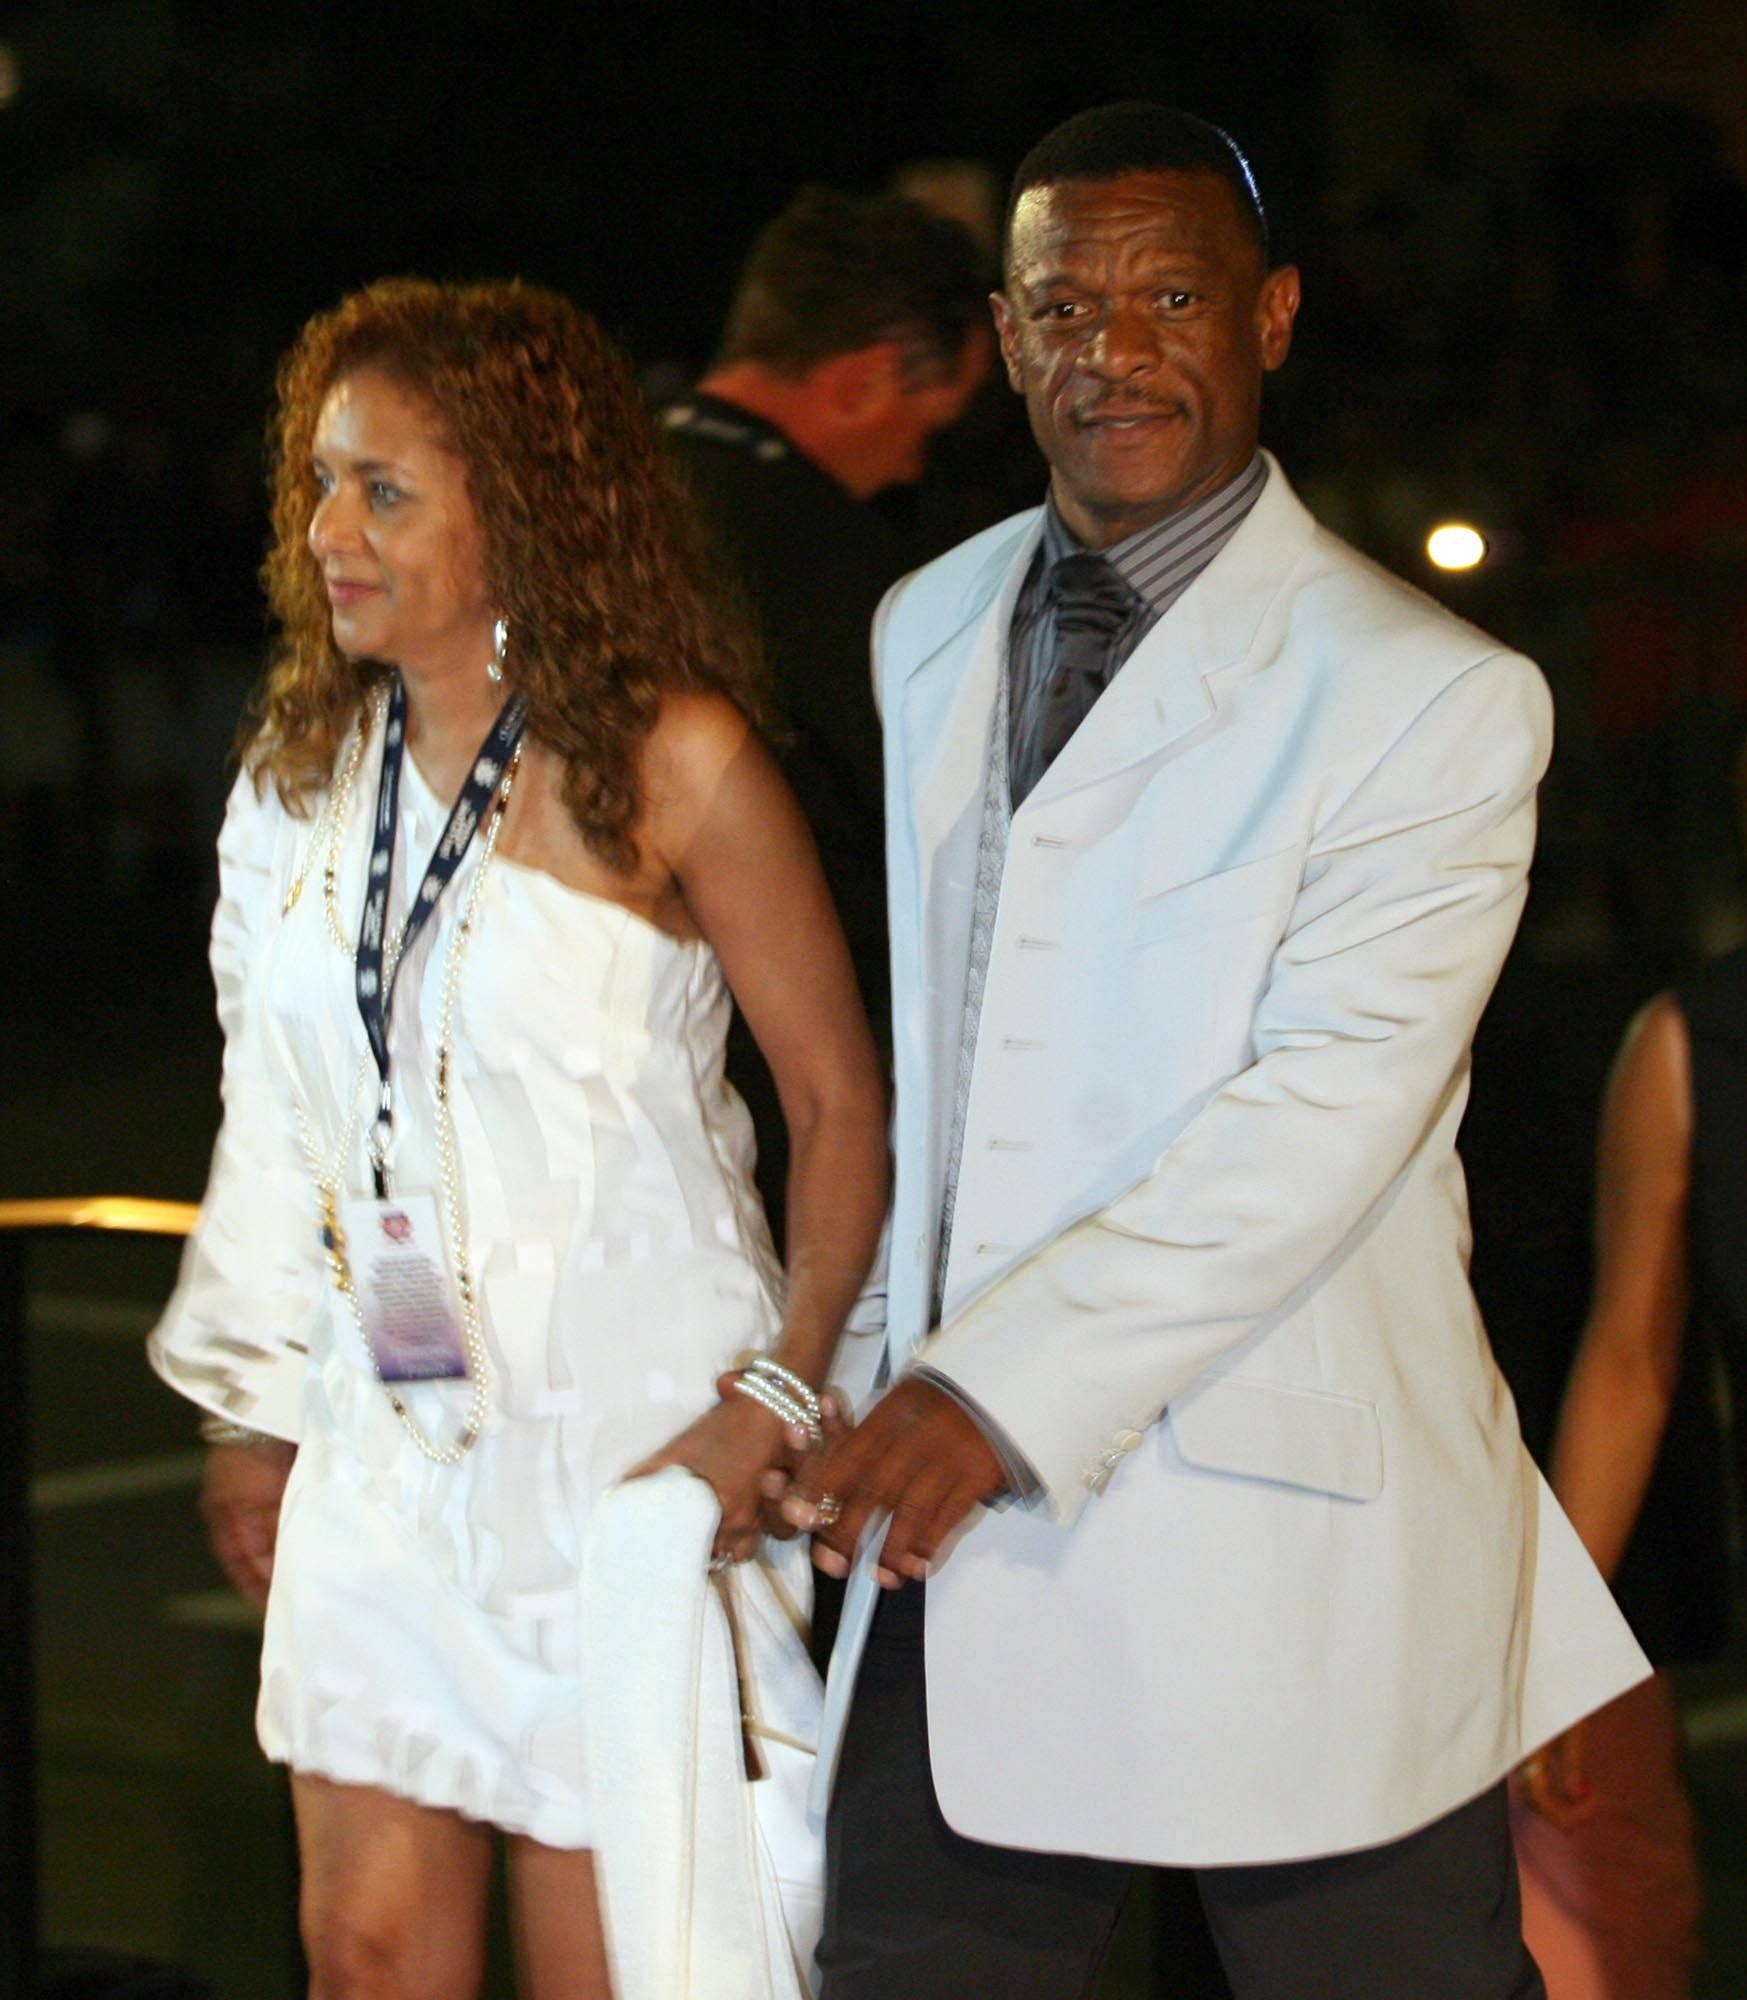 Rickey Henderson and his wife Pamela attending an event together | Source: Getty Images